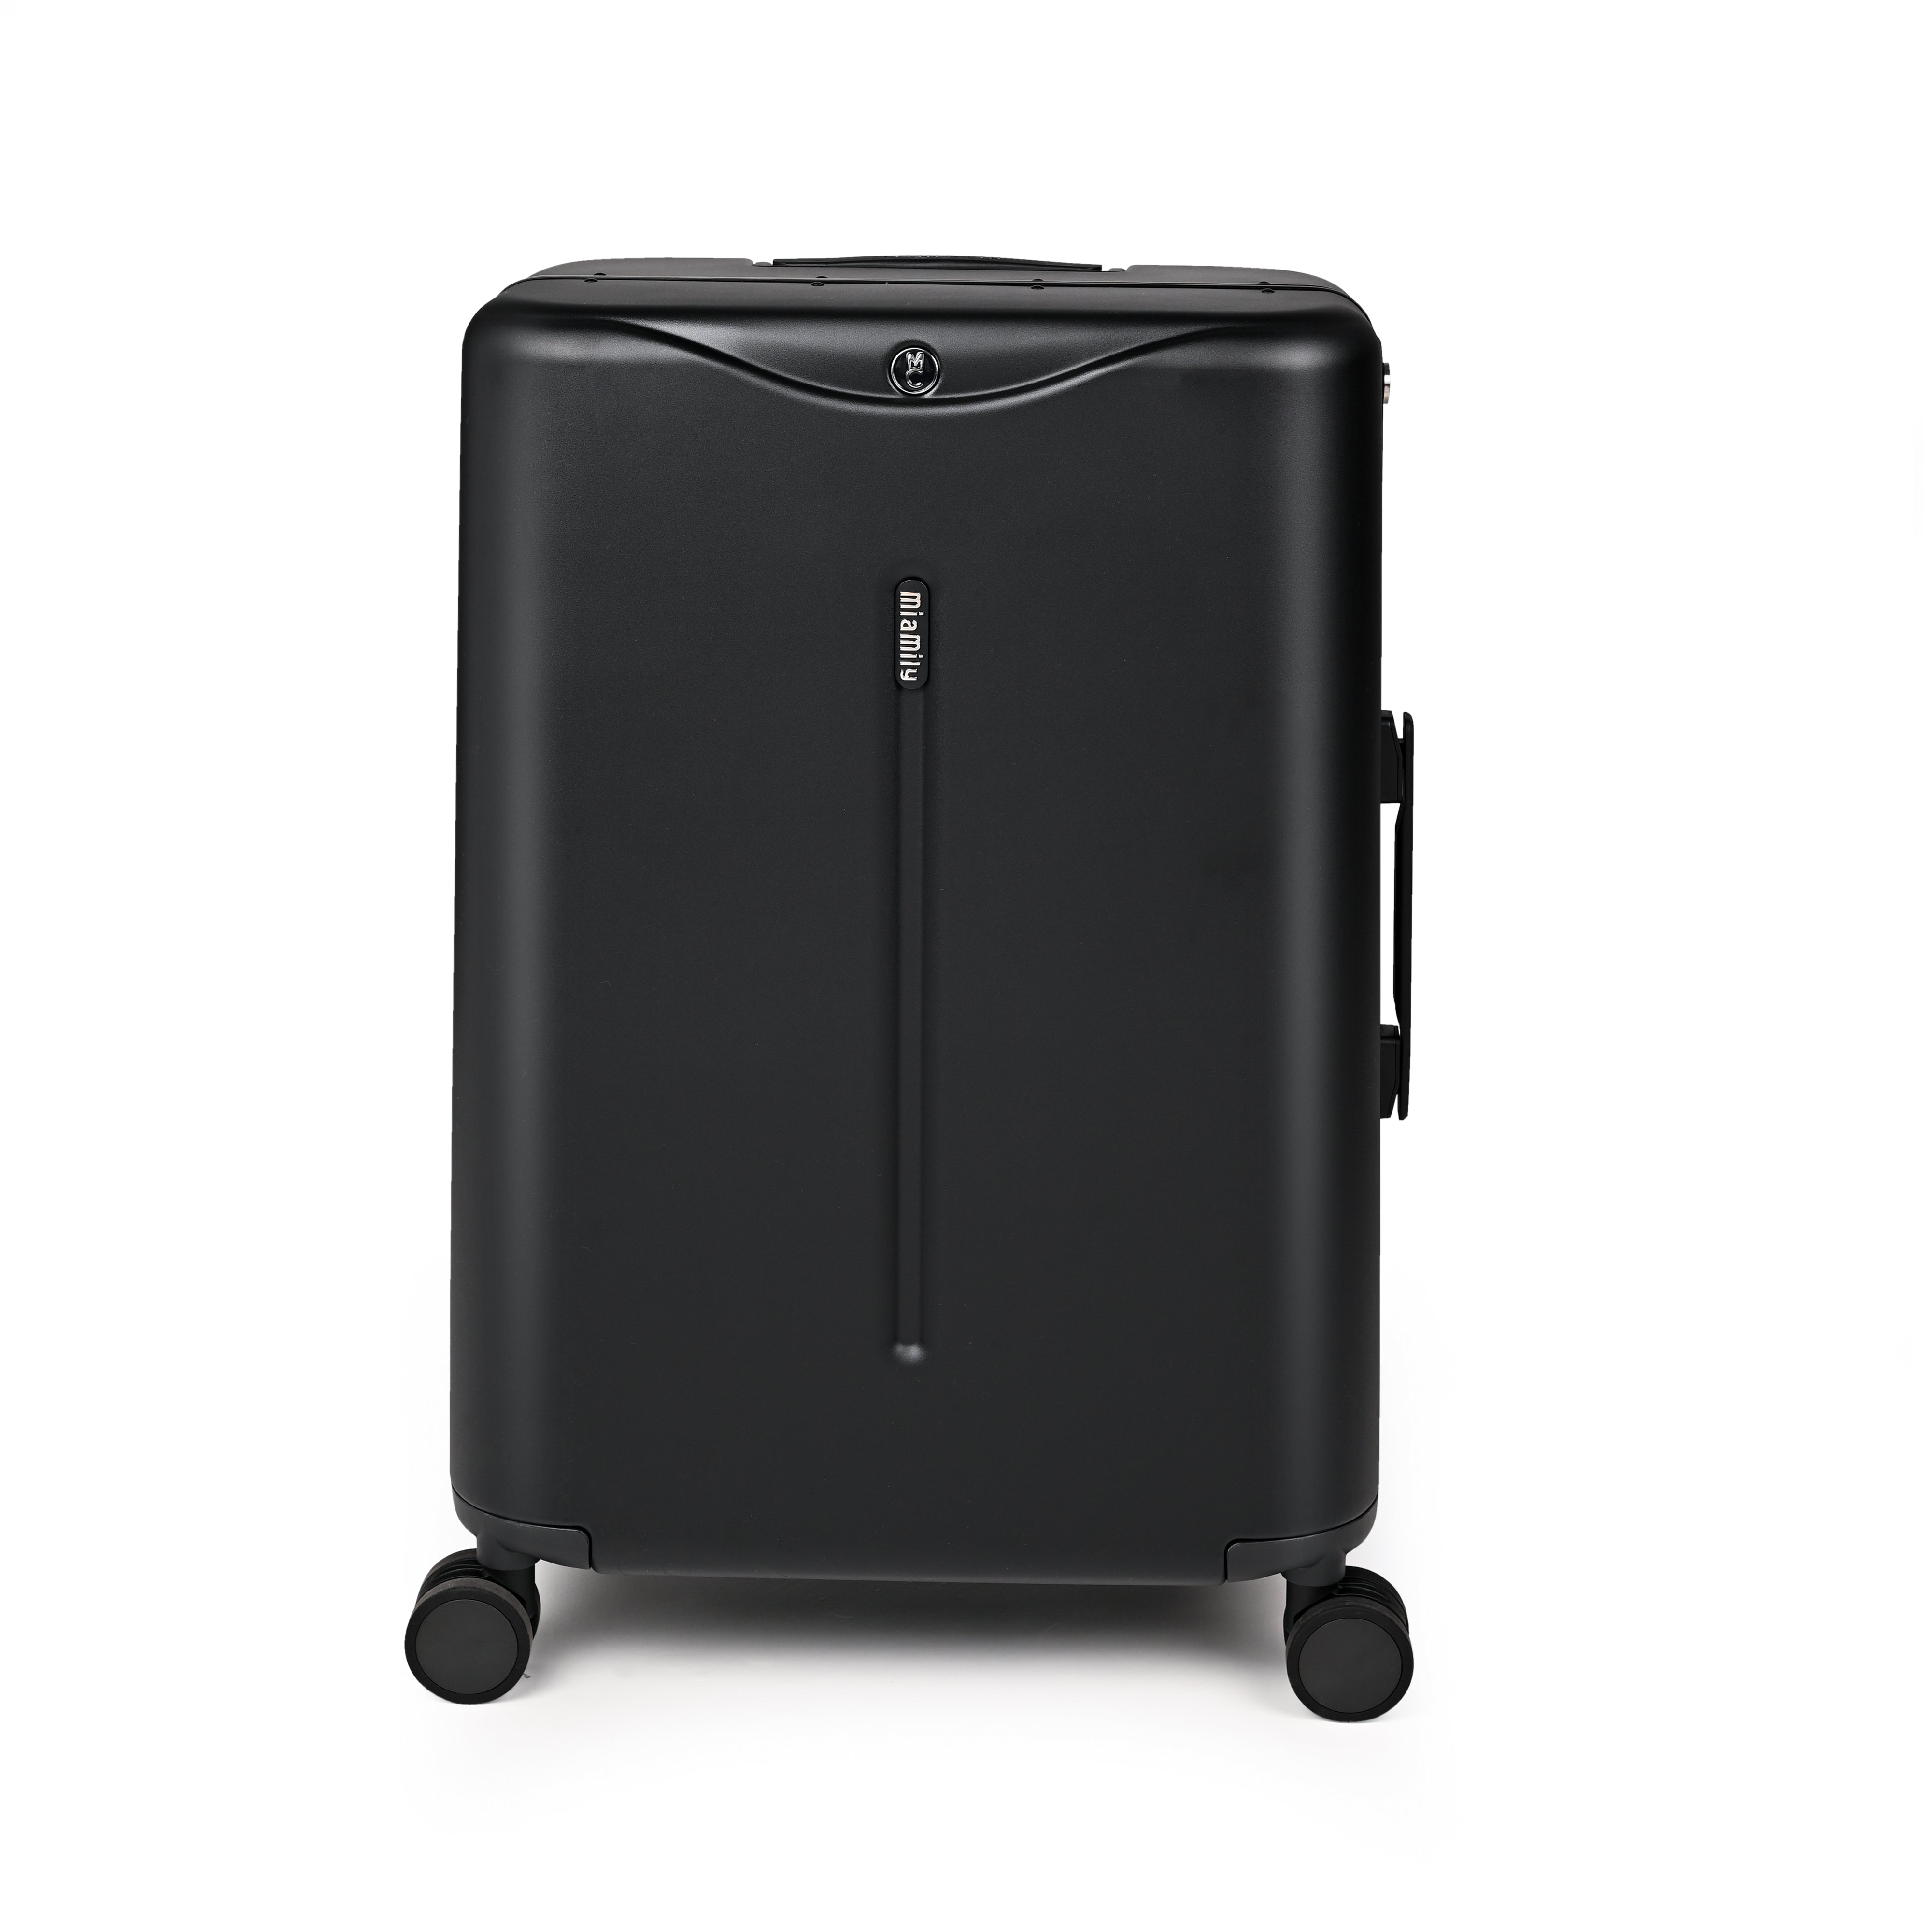 Miamily Midnight Black Ride On Trolley Check-In Luggage 24 inches